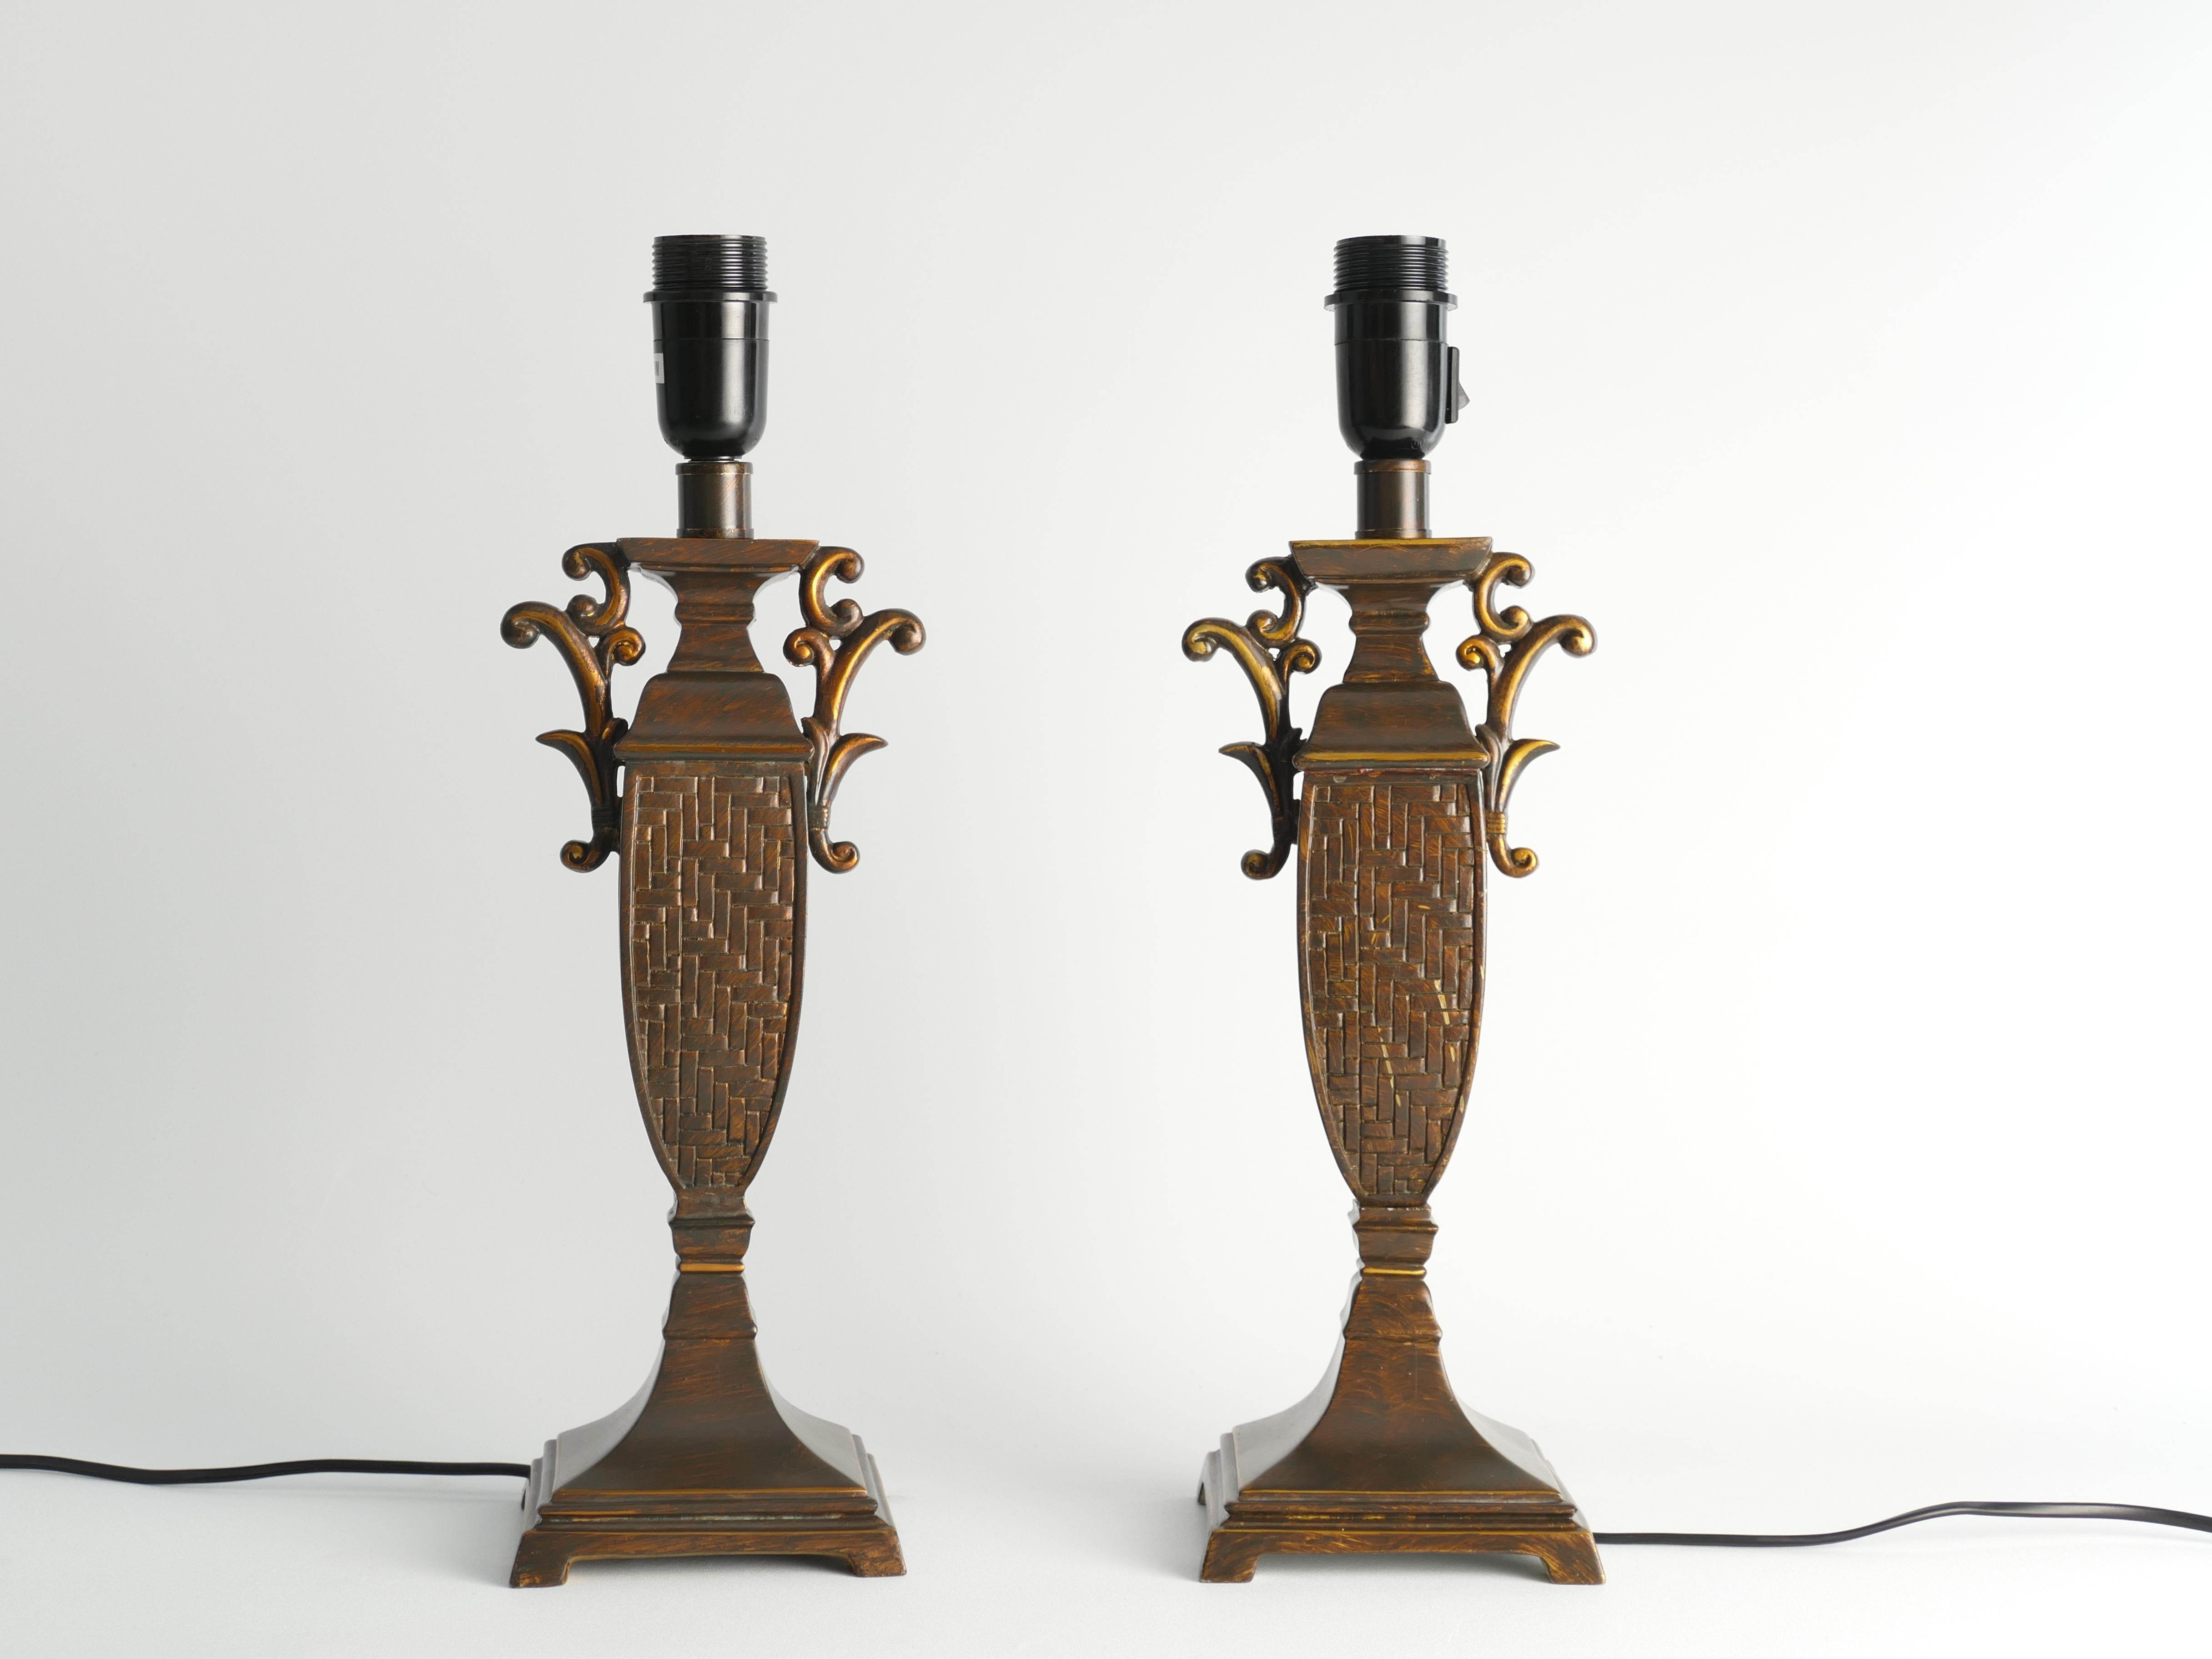 Swedish Chinoiserie Faux Rattan Amphora Table Lamps by Aneta, Sweden 1980's For Sale